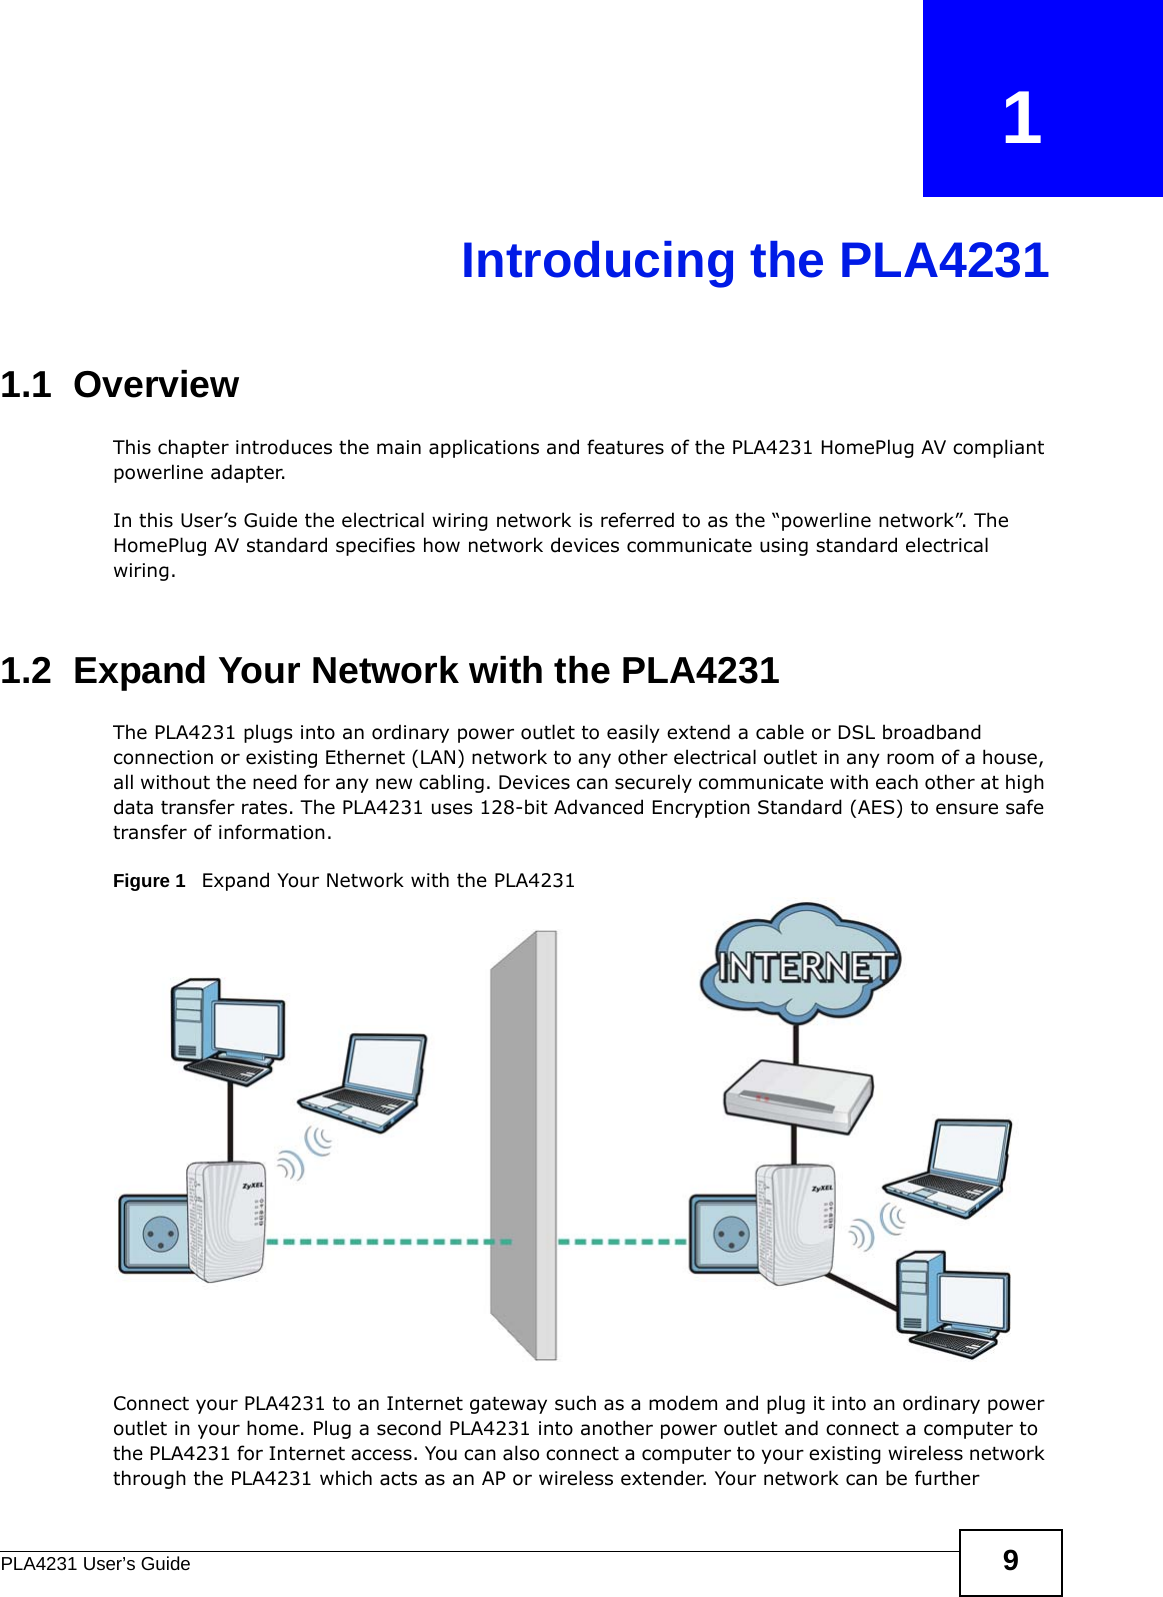 PLA4231 User’s Guide 9CHAPTER   1Introducing the PLA42311.1  OverviewThis chapter introduces the main applications and features of the PLA4231 HomePlug AV compliant powerline adapter. In this User’s Guide the electrical wiring network is referred to as the “powerline network”. The HomePlug AV standard specifies how network devices communicate using standard electrical wiring. 1.2  Expand Your Network with the PLA4231The PLA4231 plugs into an ordinary power outlet to easily extend a cable or DSL broadband connection or existing Ethernet (LAN) network to any other electrical outlet in any room of a house, all without the need for any new cabling. Devices can securely communicate with each other at high data transfer rates. The PLA4231 uses 128-bit Advanced Encryption Standard (AES) to ensure safe transfer of information. Figure 1   Expand Your Network with the PLA4231Connect your PLA4231 to an Internet gateway such as a modem and plug it into an ordinary power outlet in your home. Plug a second PLA4231 into another power outlet and connect a computer to the PLA4231 for Internet access. You can also connect a computer to your existing wireless network through the PLA4231 which acts as an AP or wireless extender. Your network can be further 